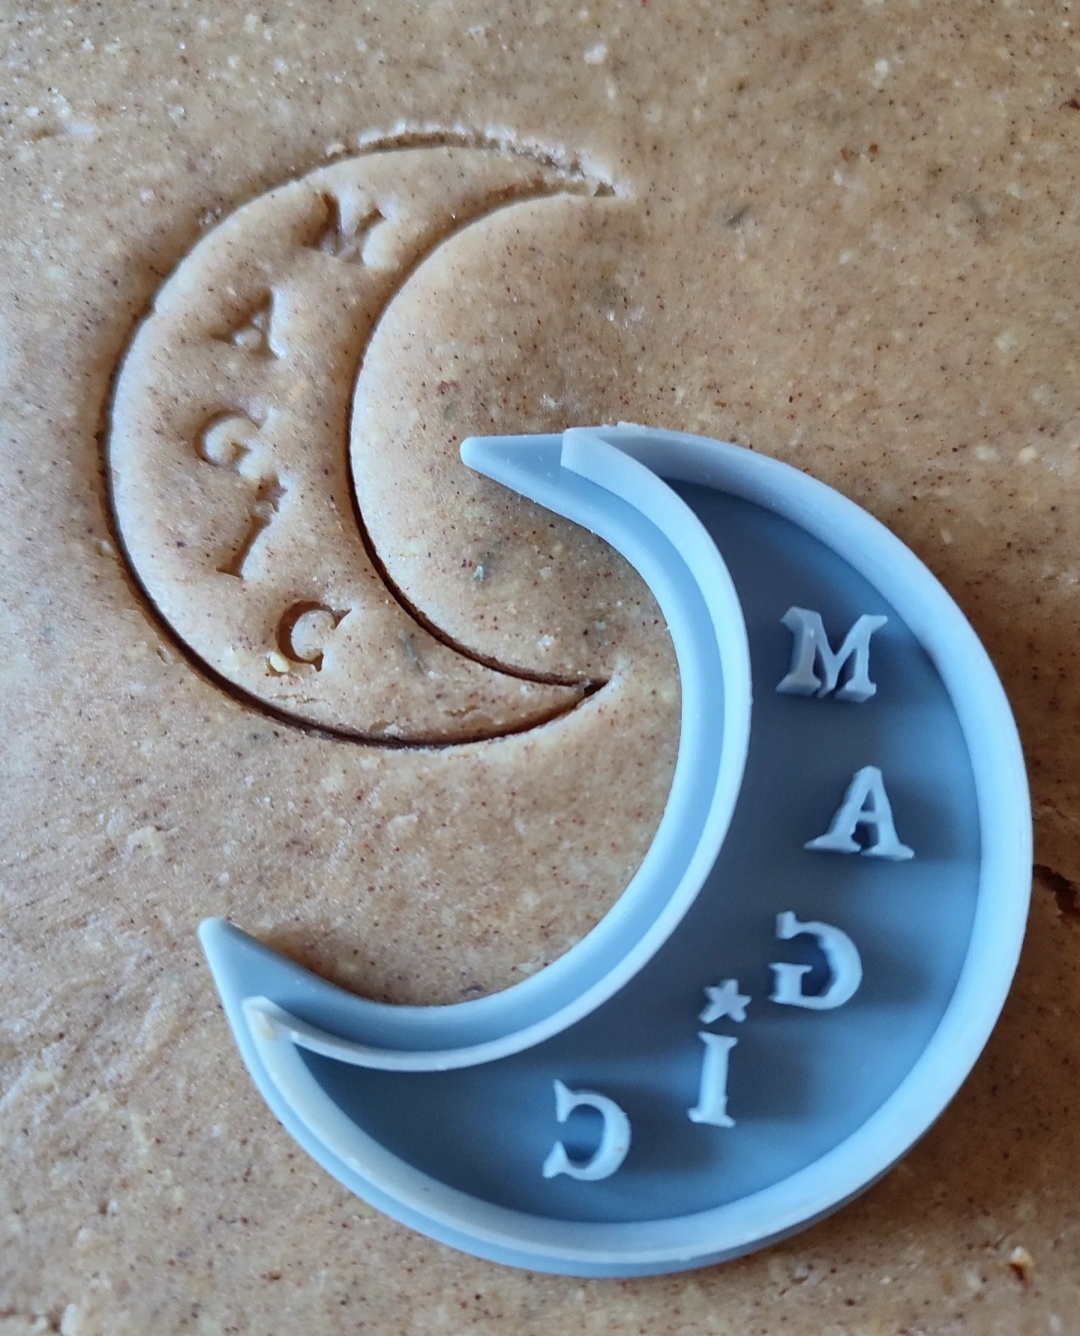 Moon spell cookies - Les Petits Chaudrons